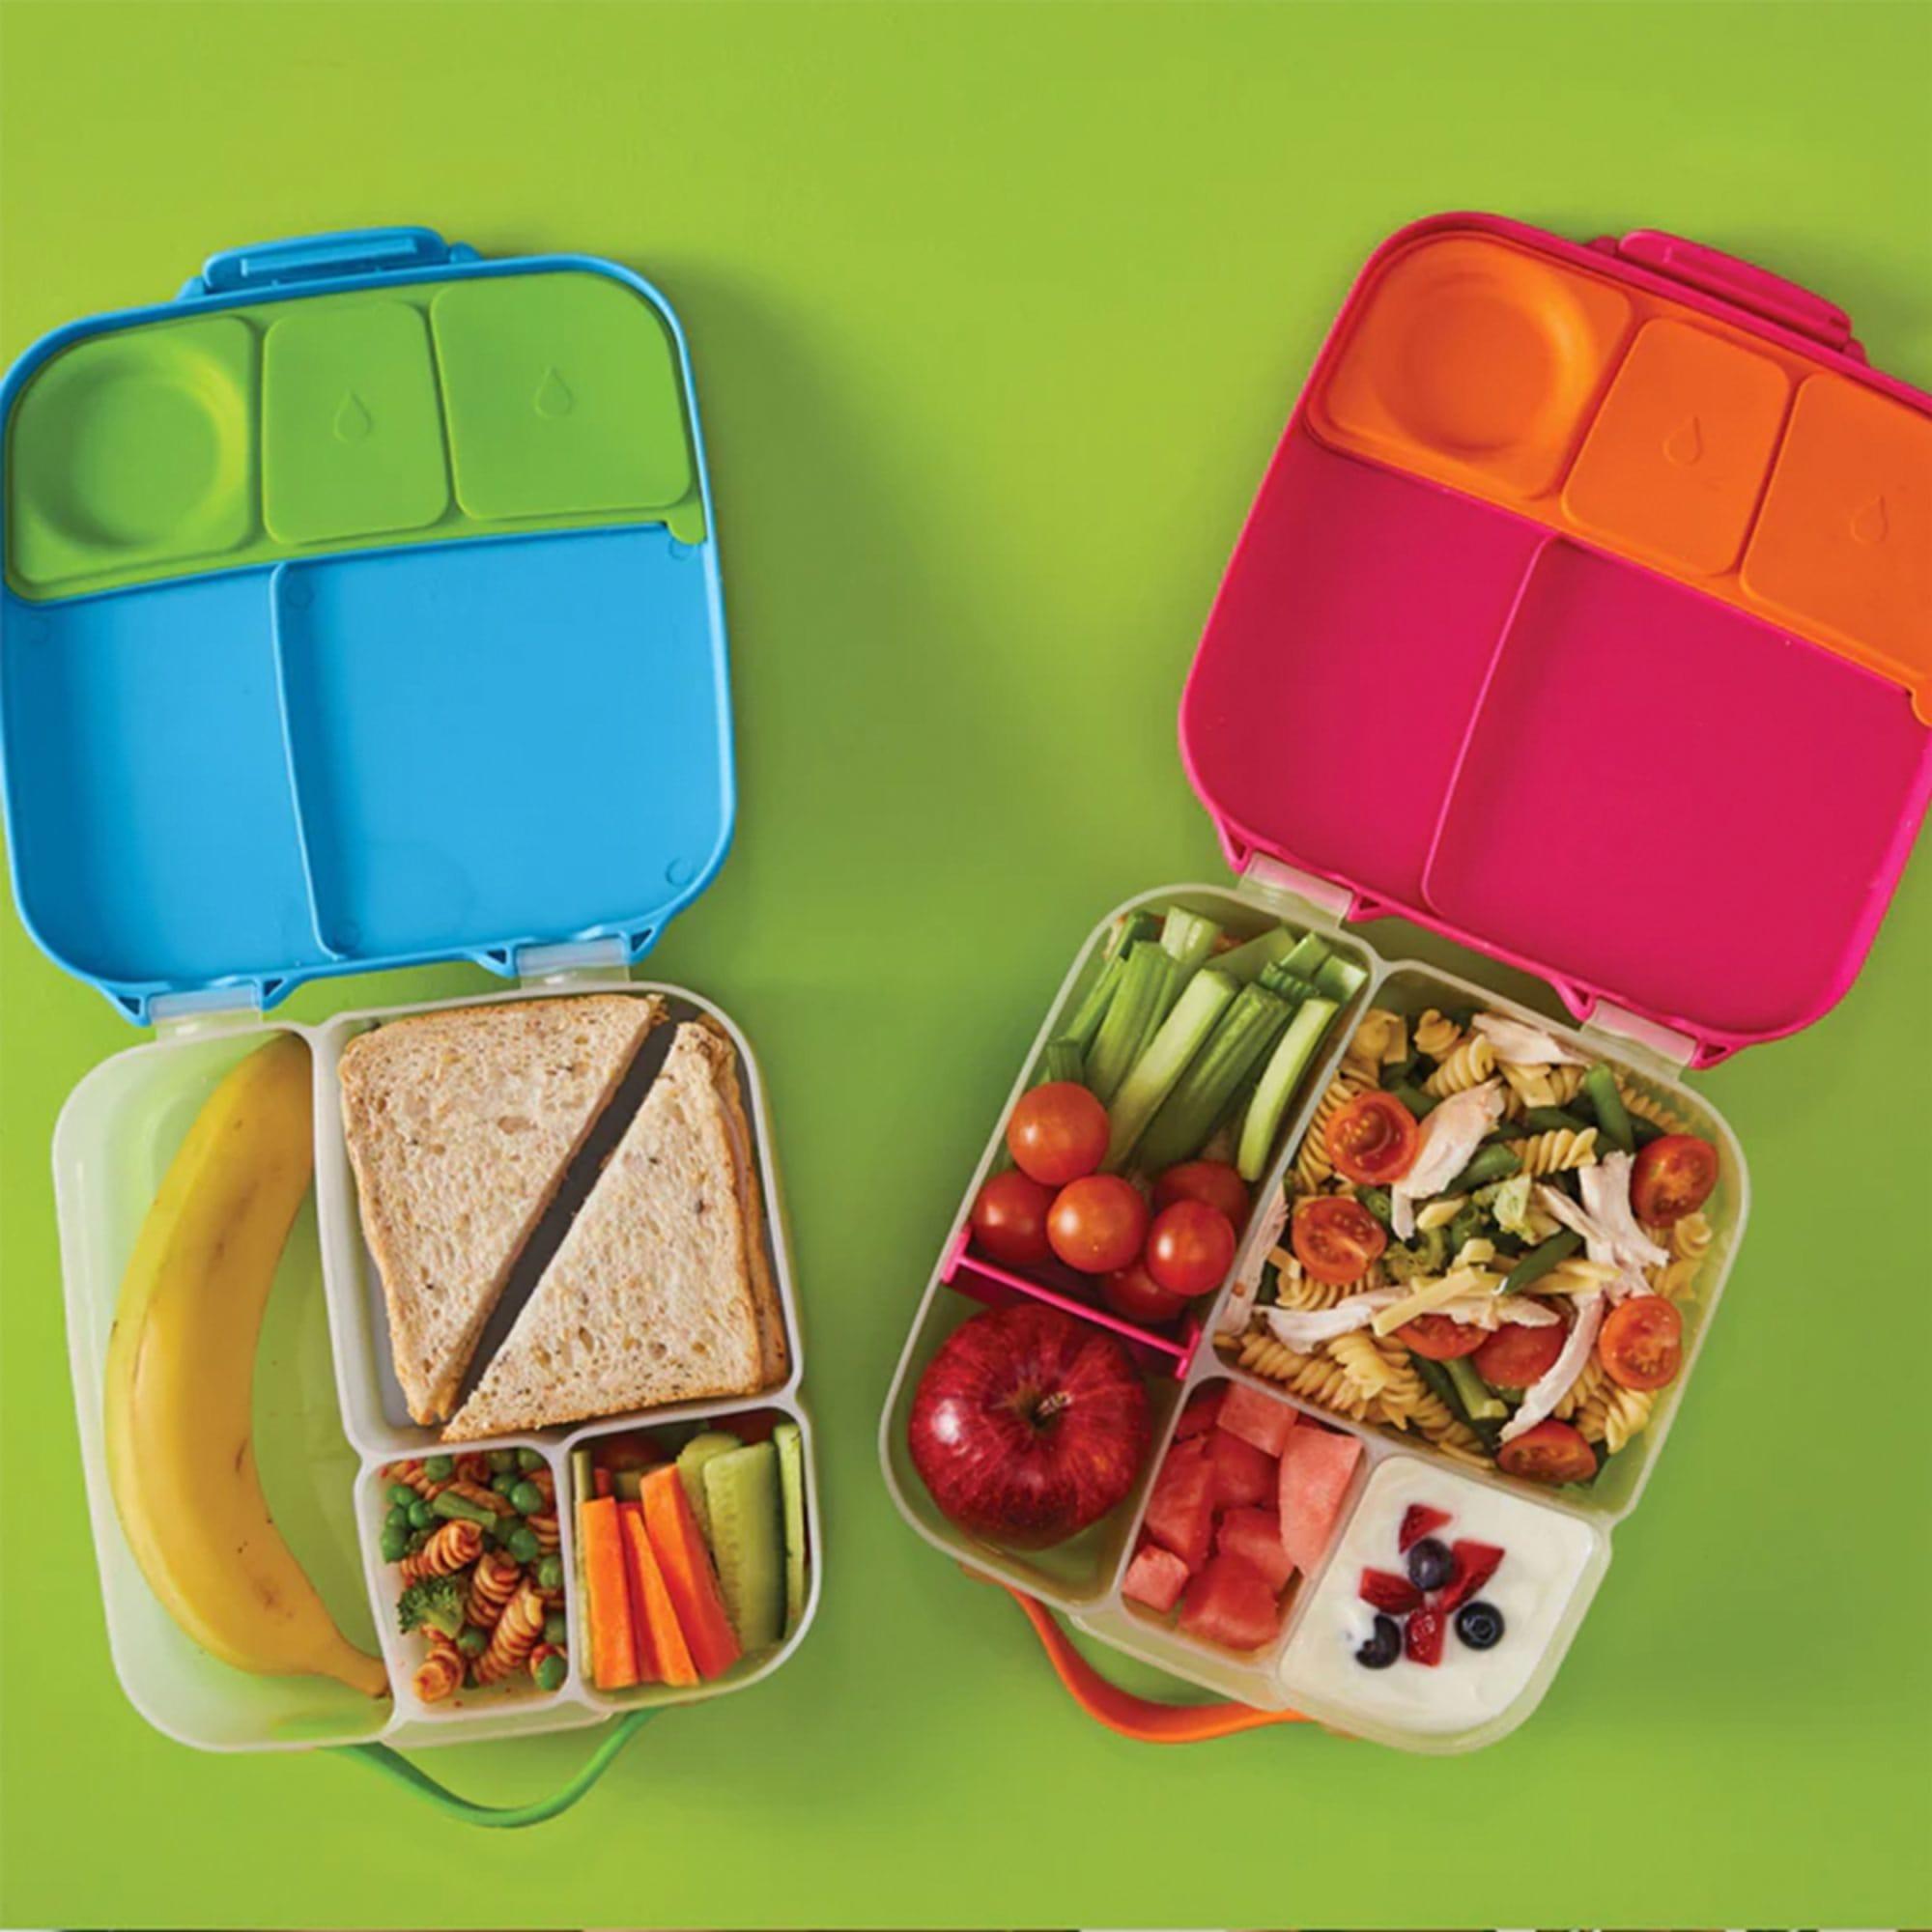 b.box Lunch Box with Gel Cooler 2L Ocean Breeze Image 4